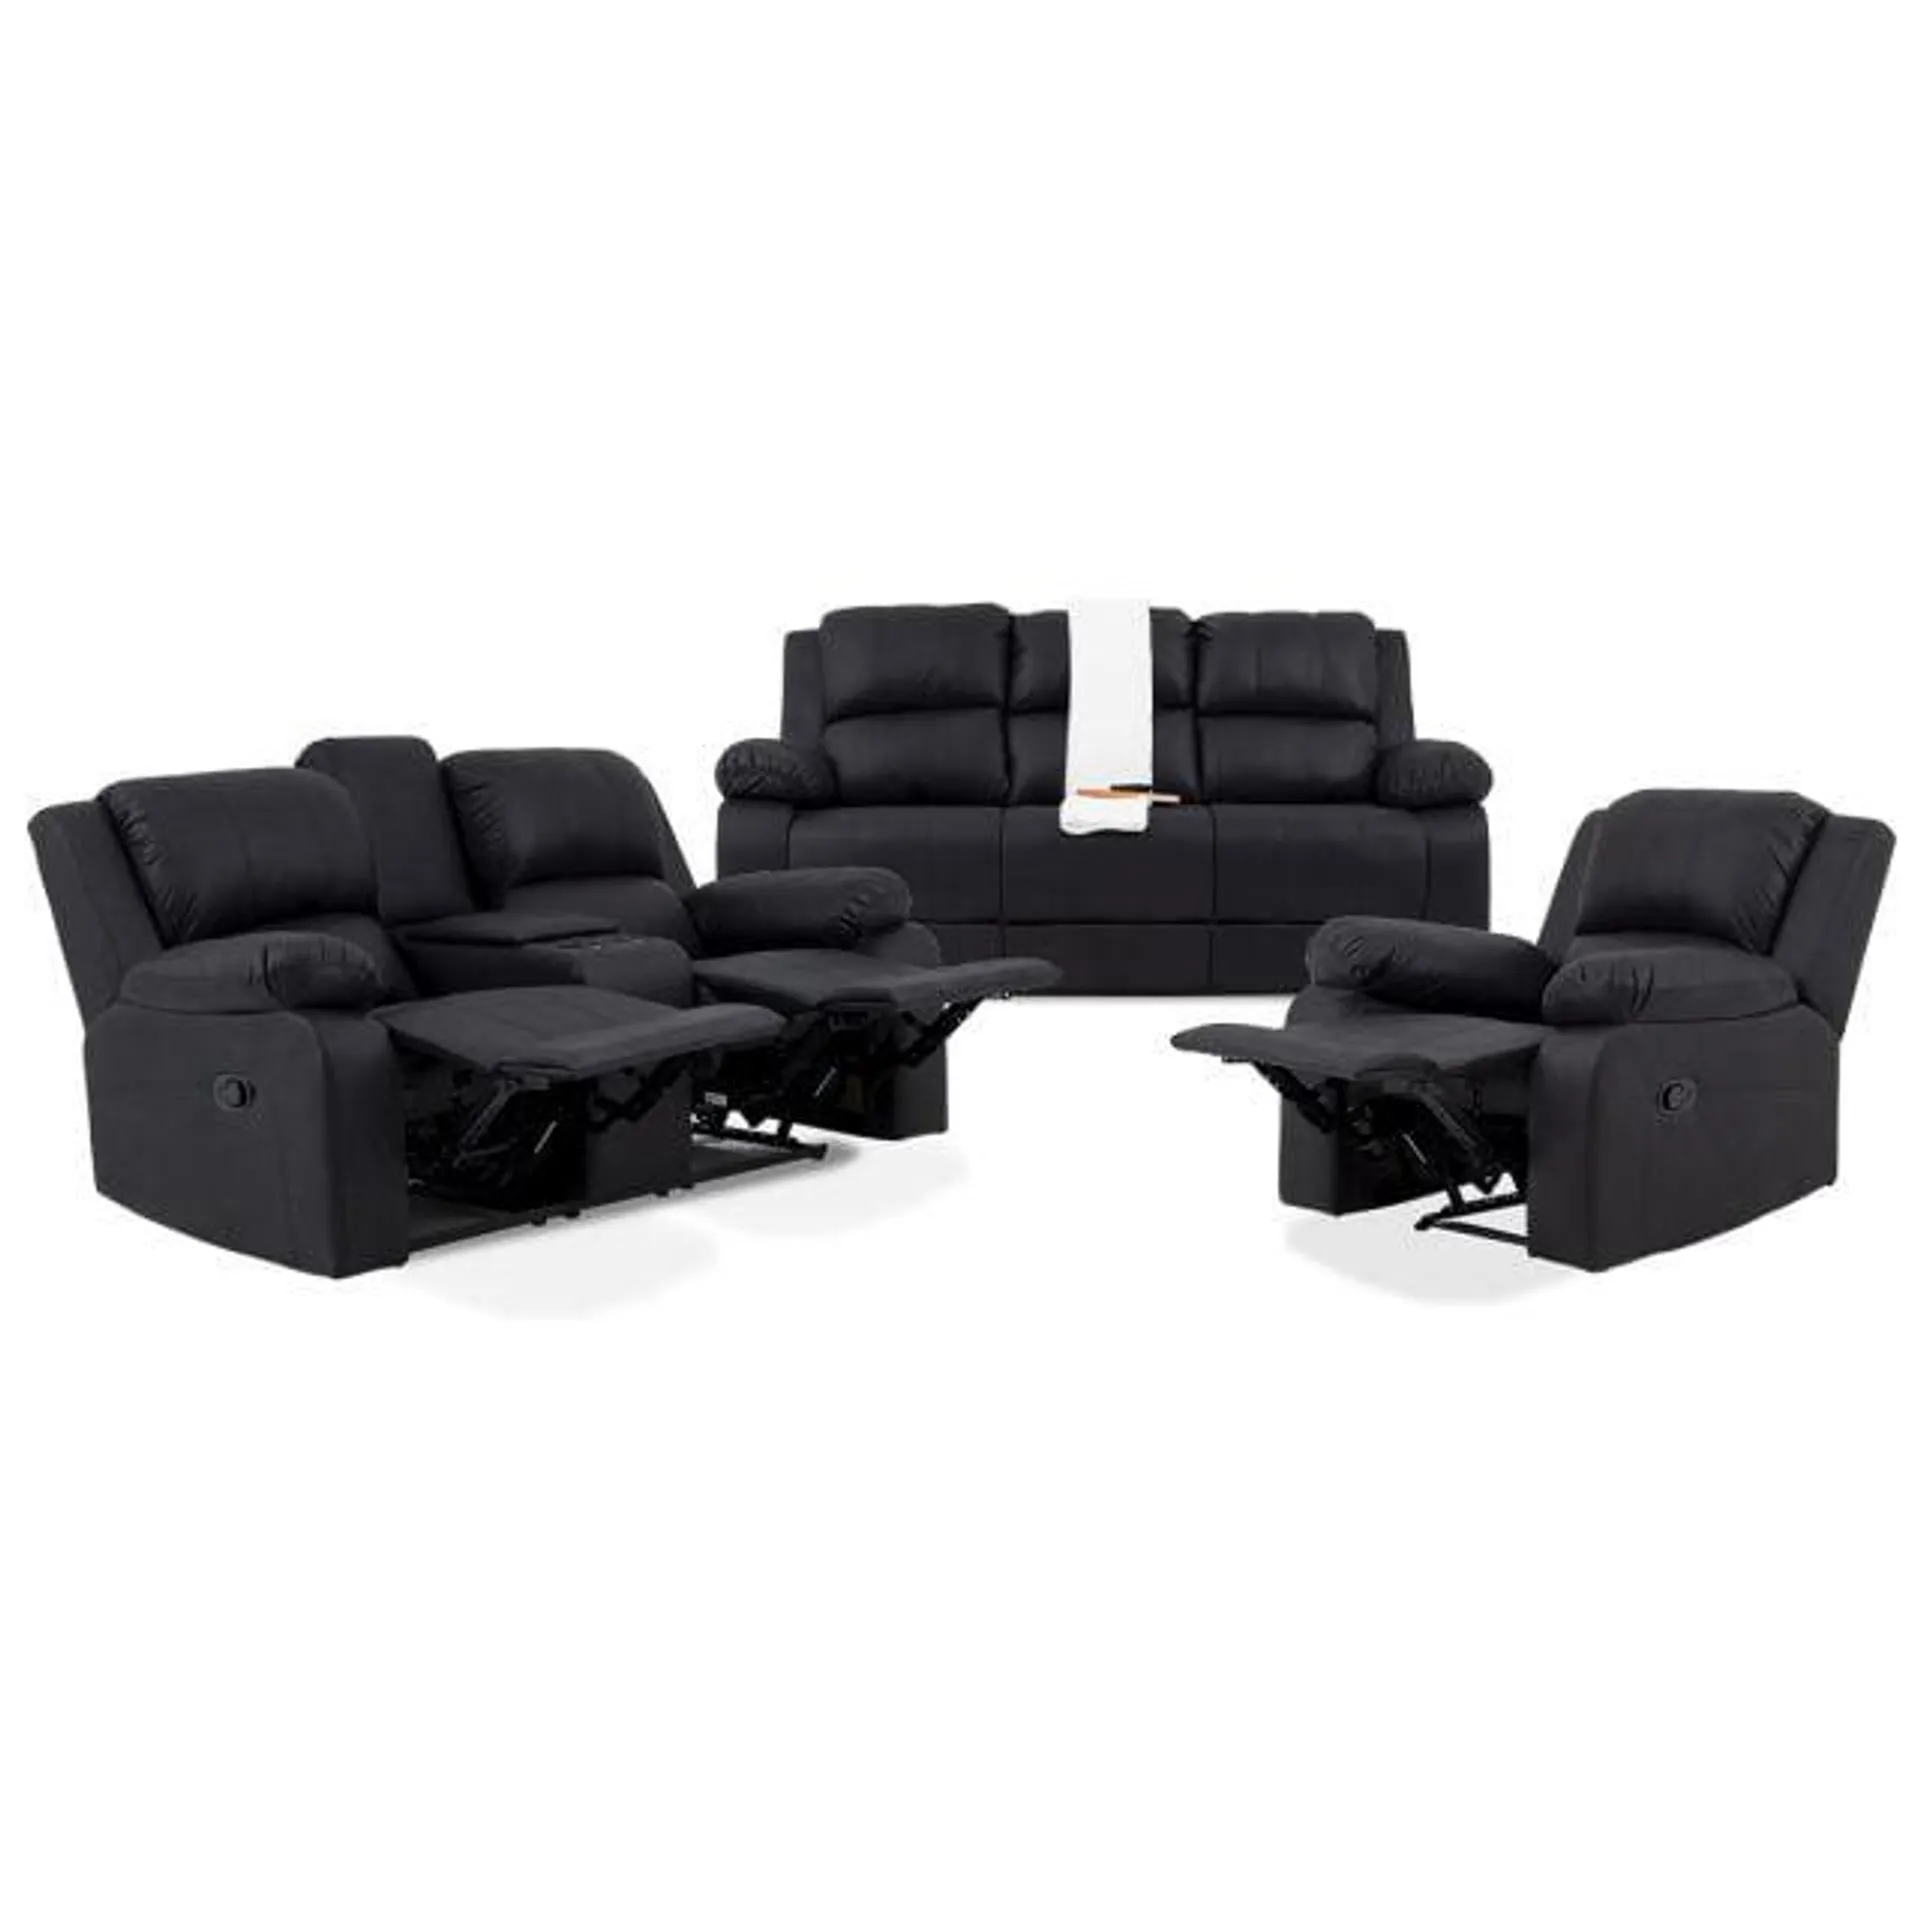 Jamine Leather Touch 3 Seater Lounge Suite with Recliners